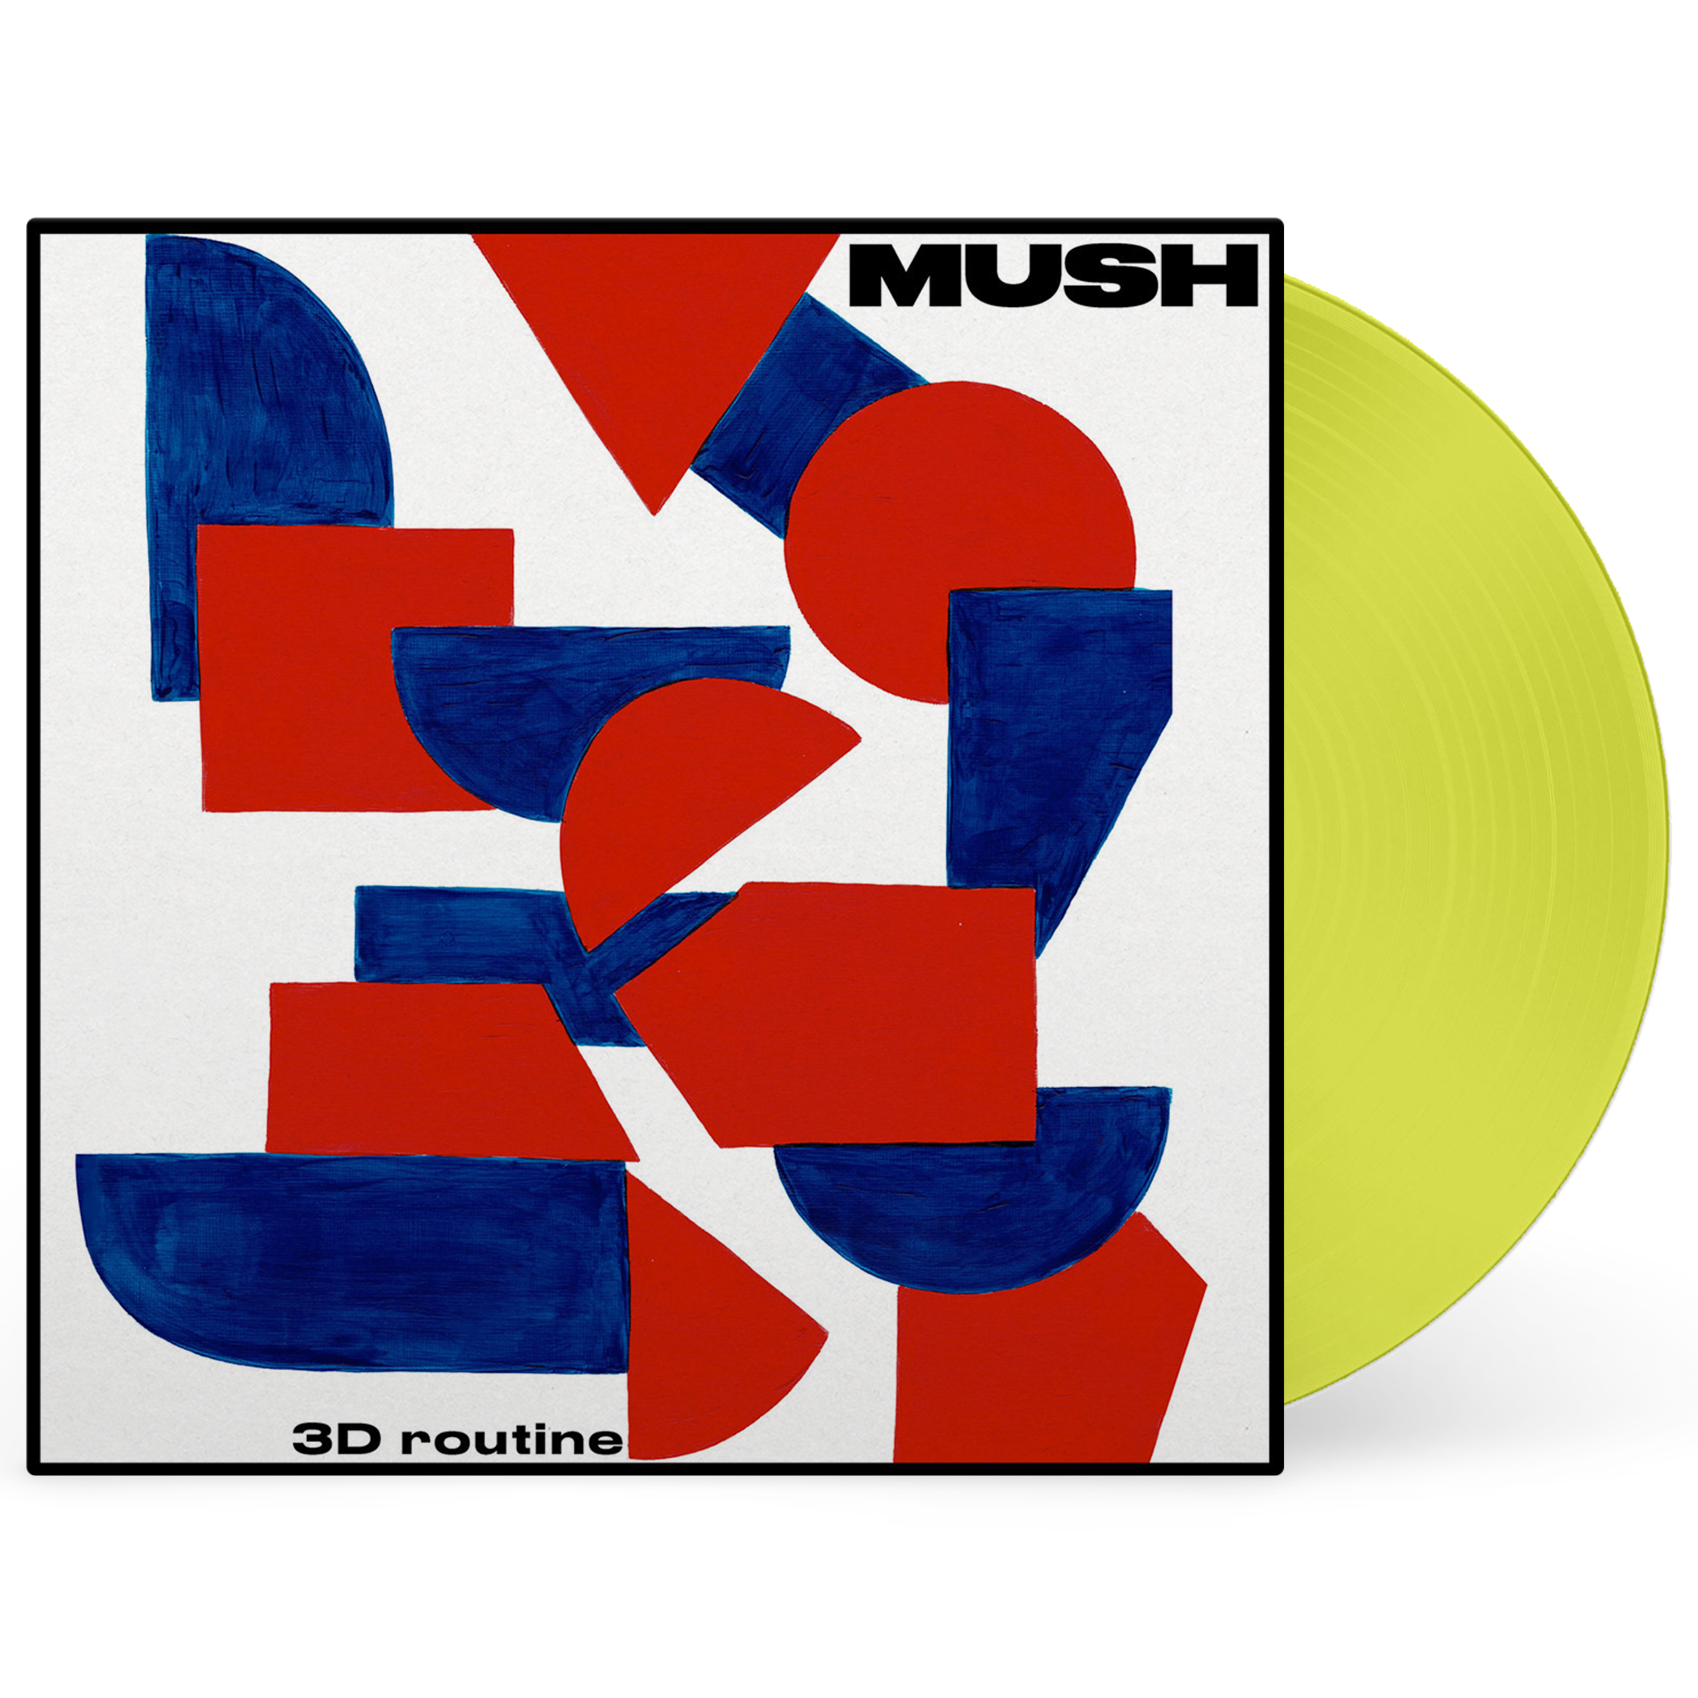 Album artwork for 3D Routine by Mush